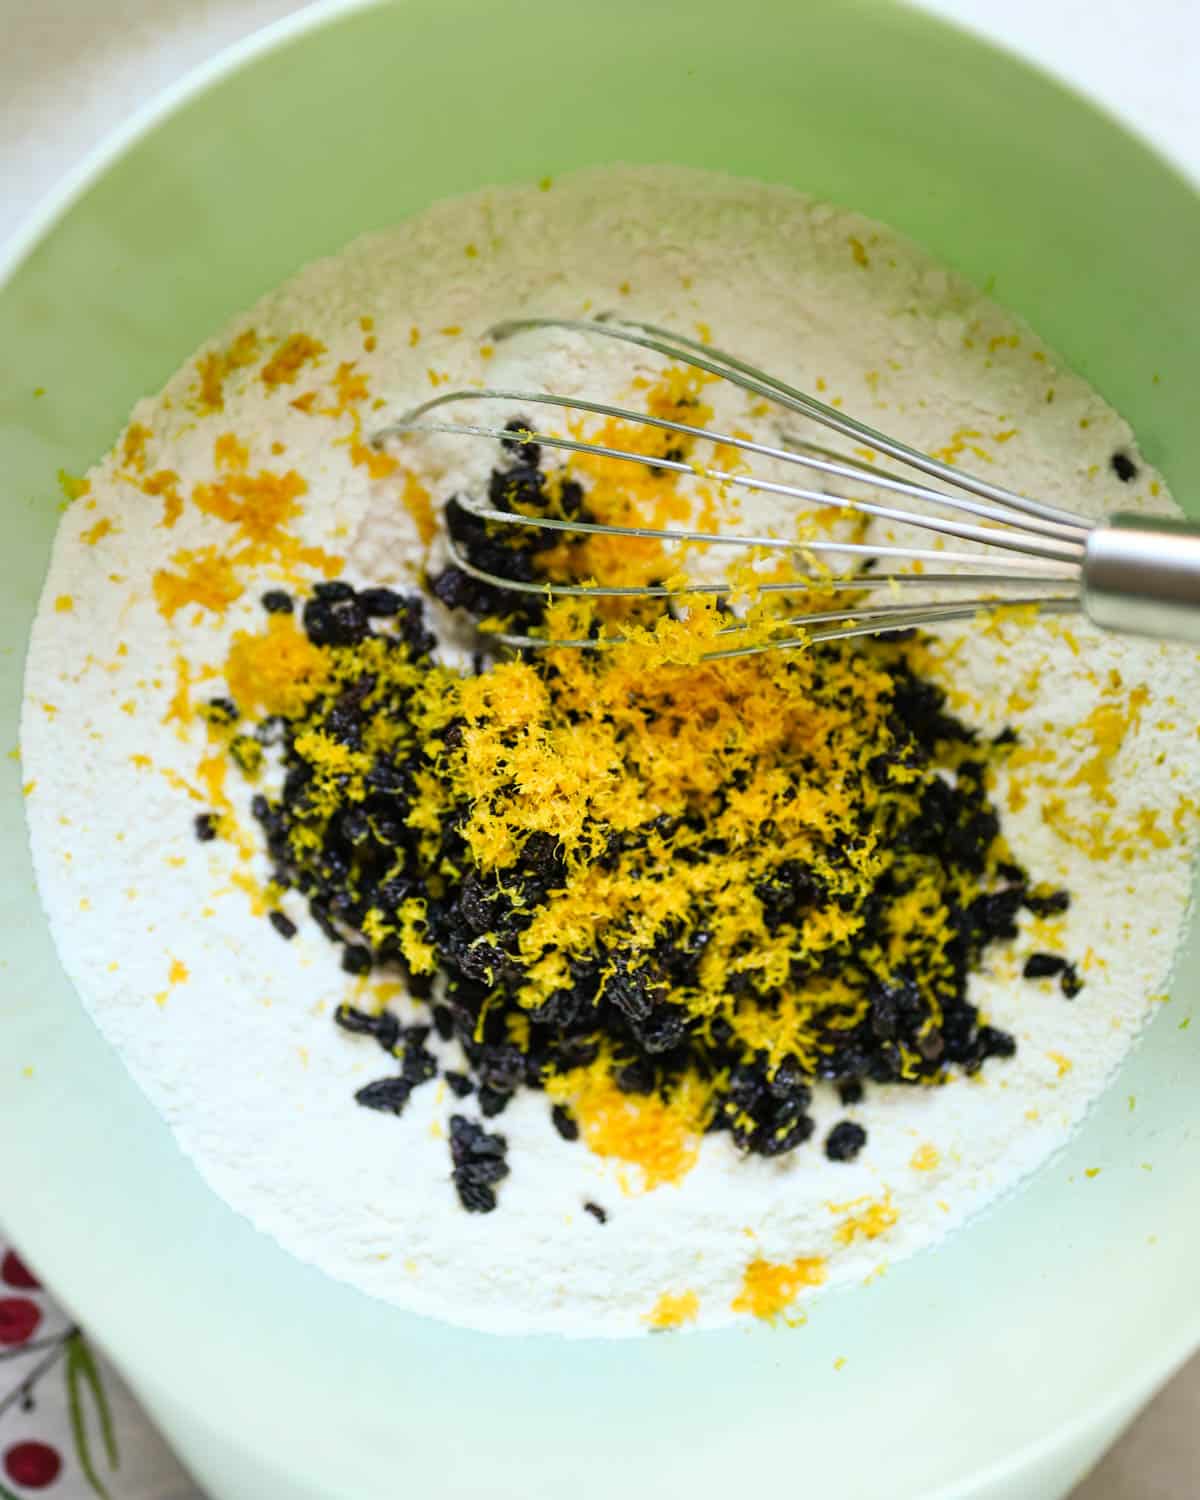 Adding orange zest and dried currants to the flour and dry ingredients.